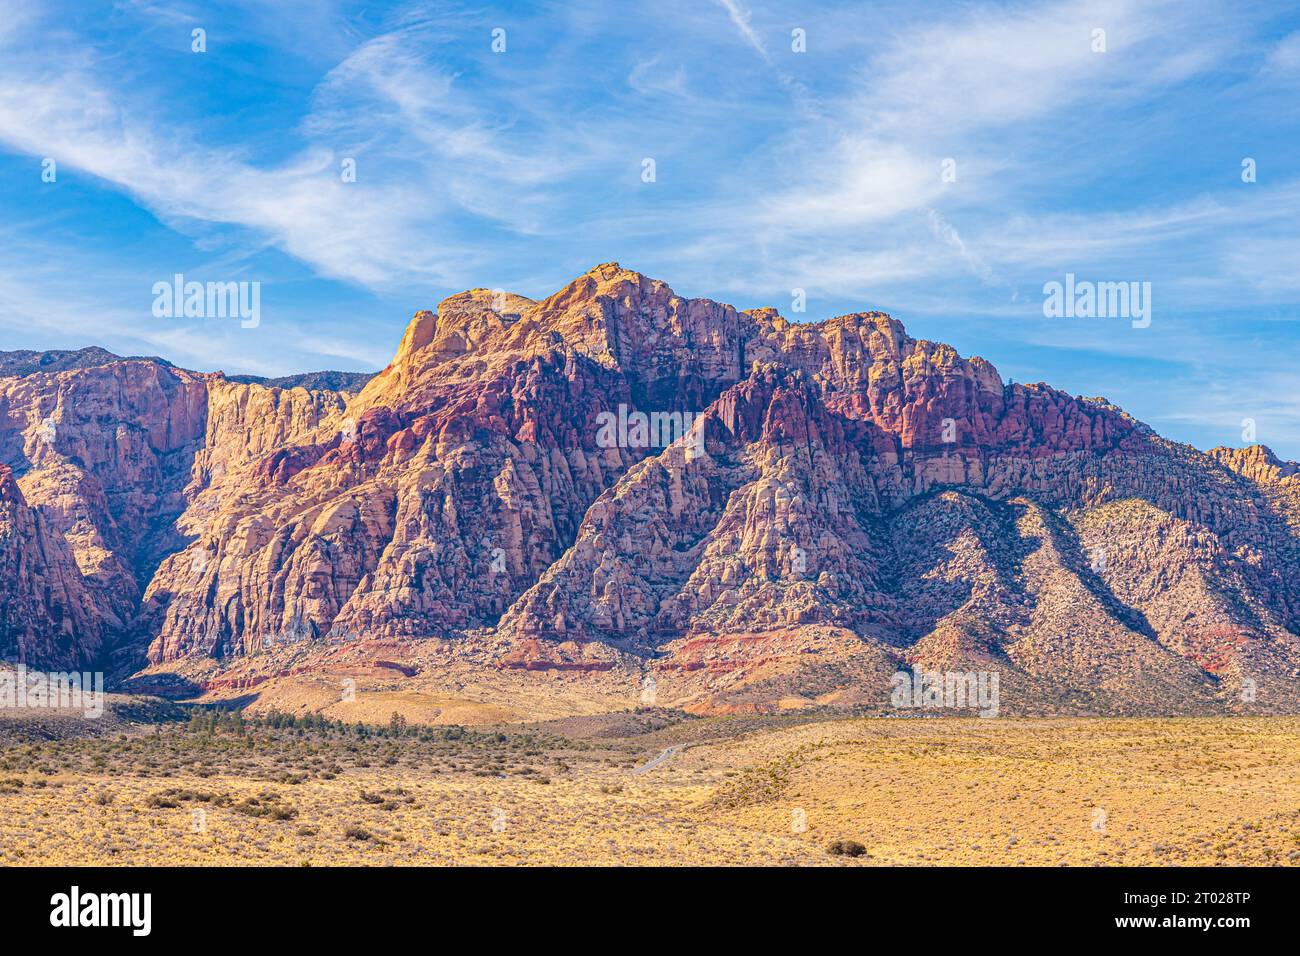 Red Rock Canyon Las Vegas Nevada Banque D'Images